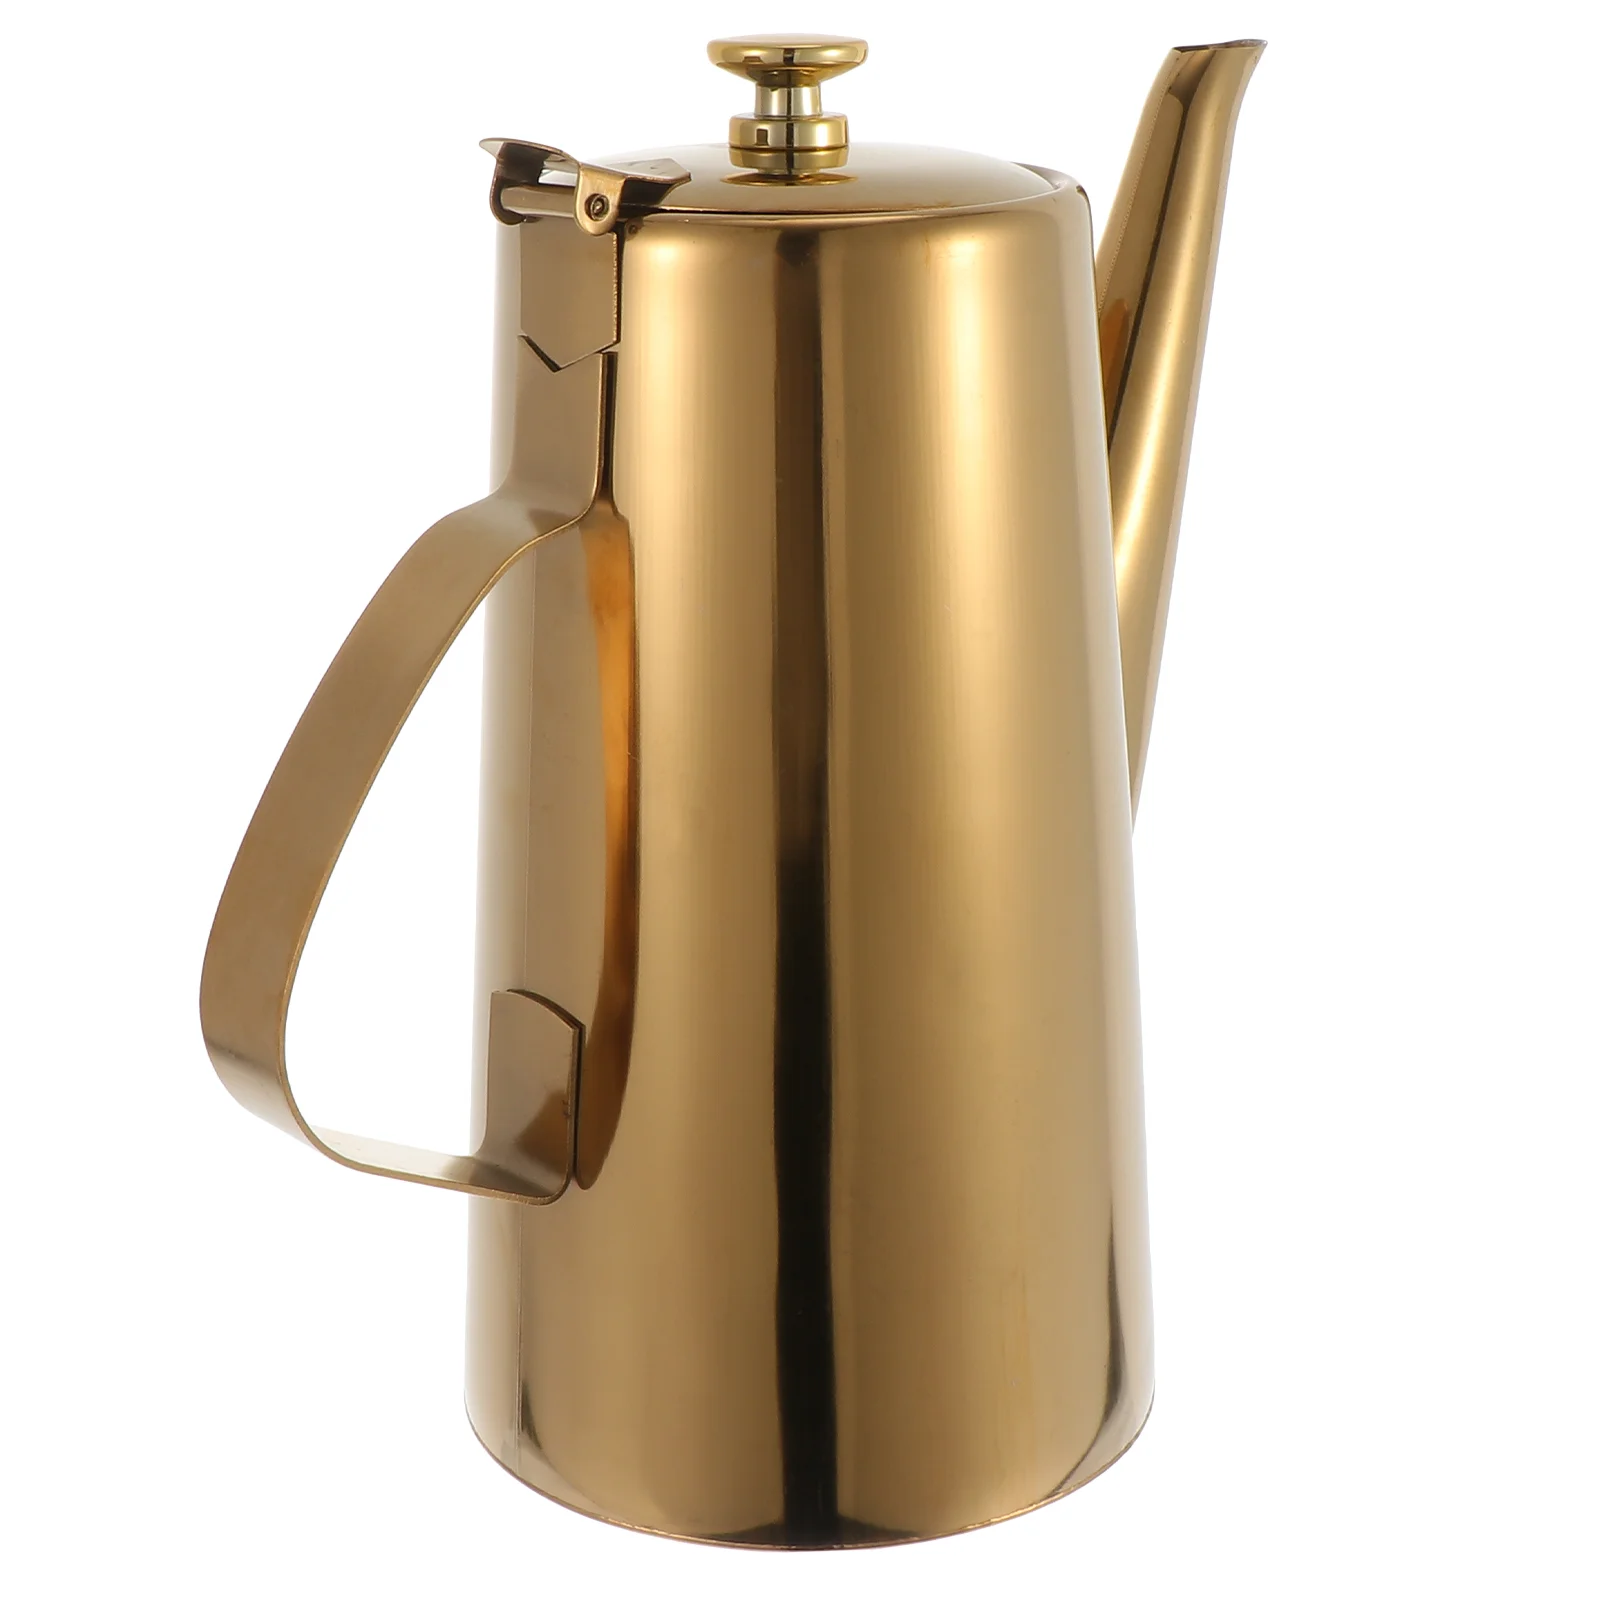 

Cold Water Bottle Restaurant Soup Pot Dispenser Oil Container Sesame Large Soy Sauce Stainless Steel Can